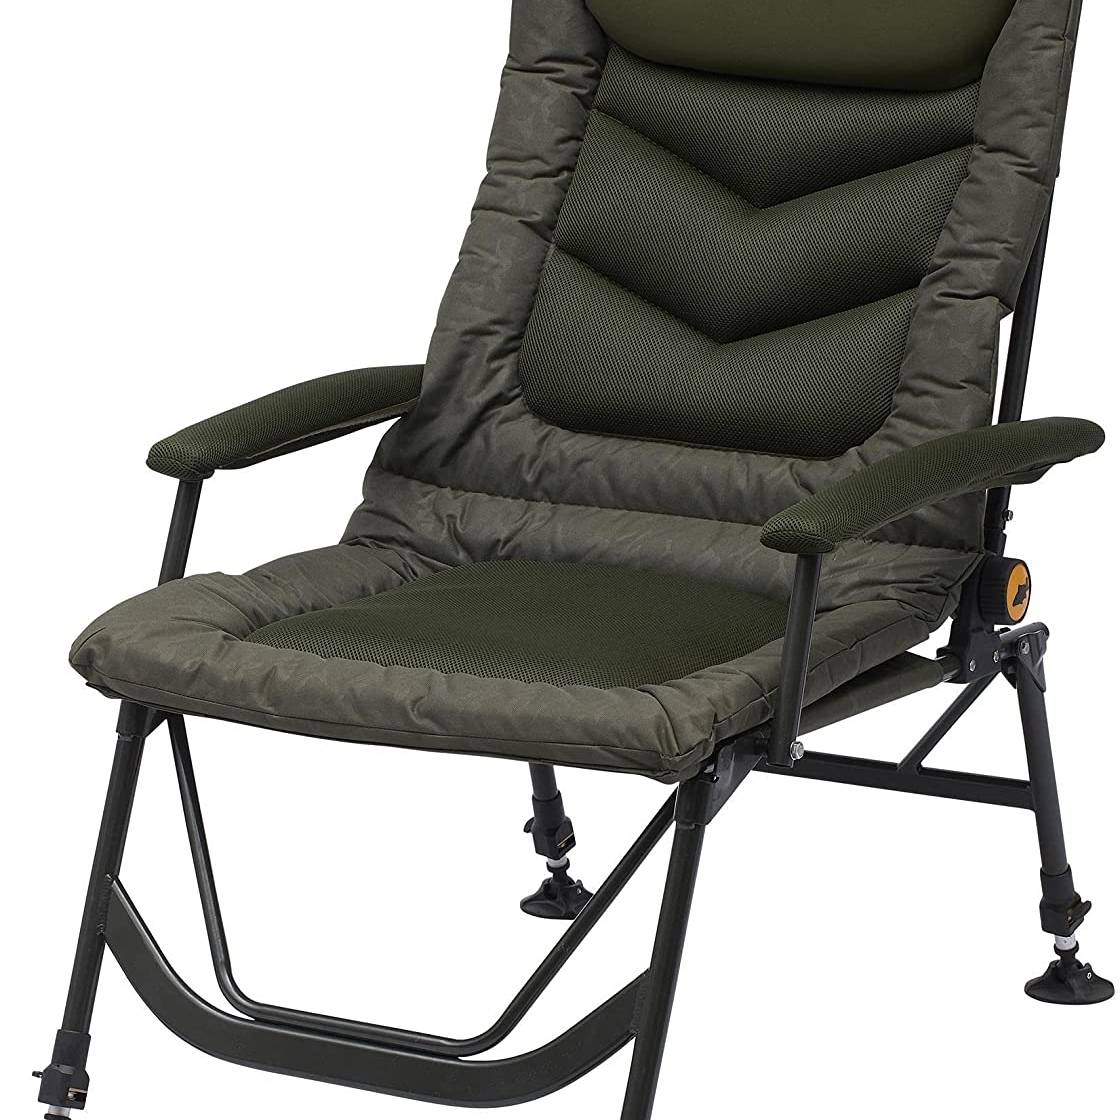 Prologic Inspire Daddy Long Chair Recliner